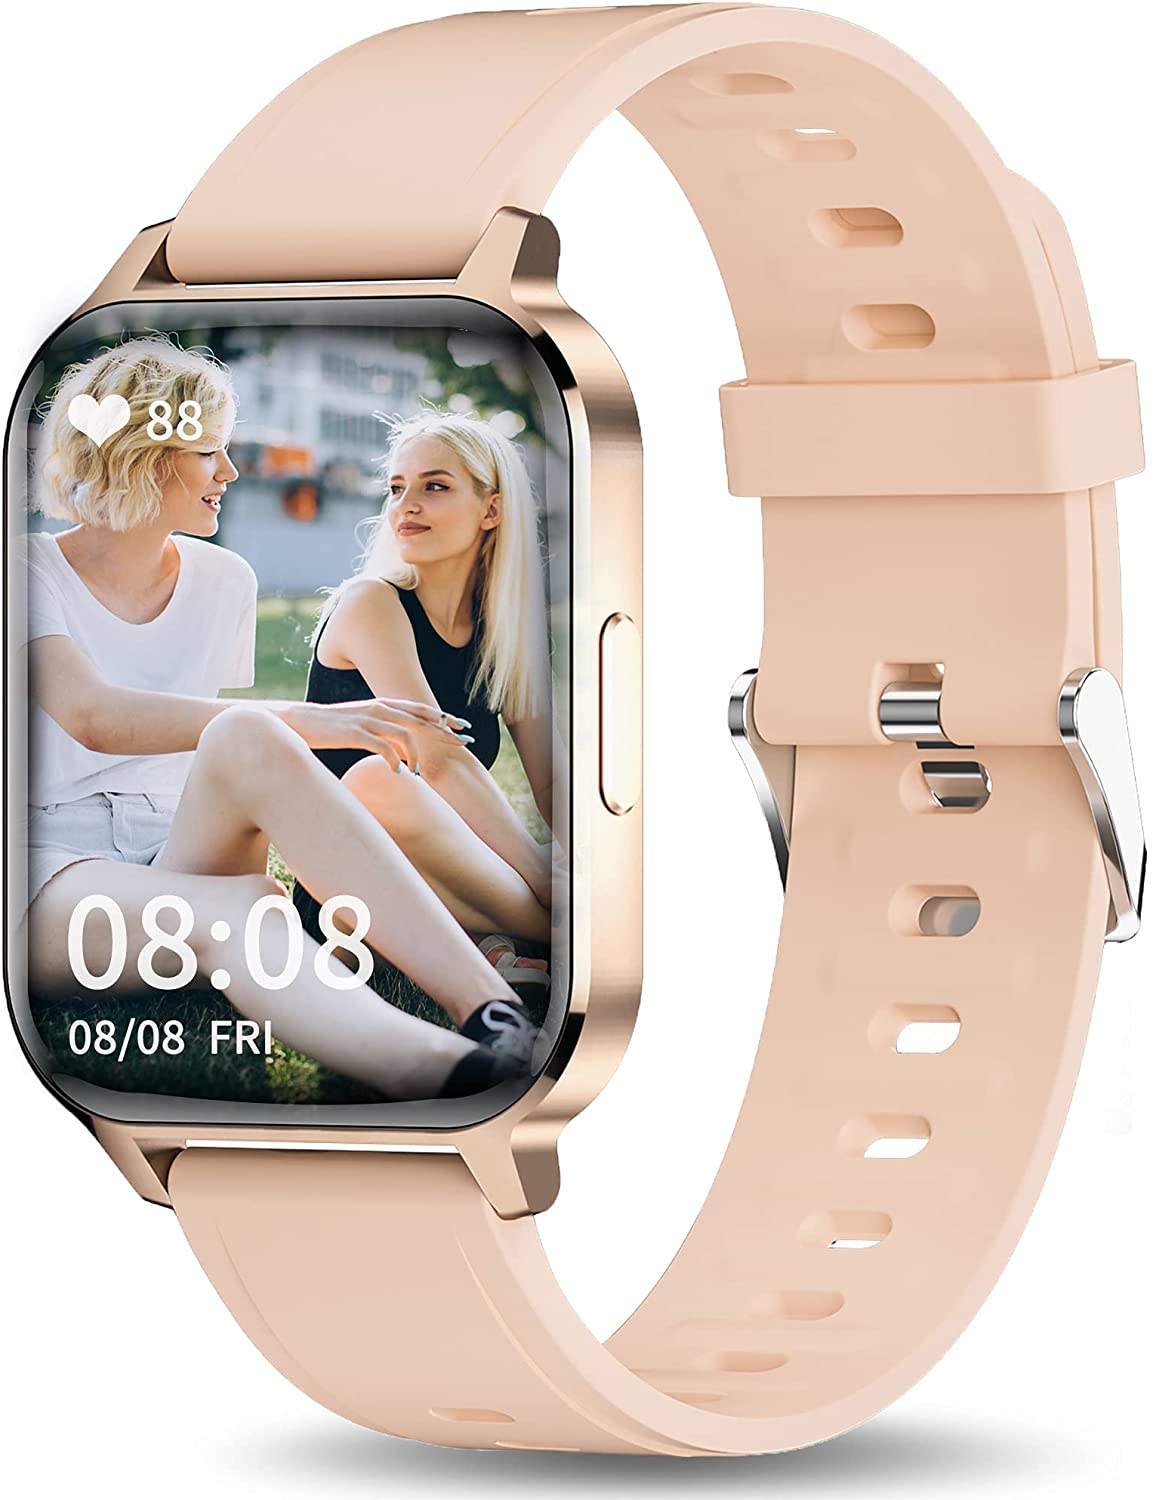 Smart Watch for Women, Smartwatch for Android and iOS Phones IP68 Waterproof Fitness Tracker